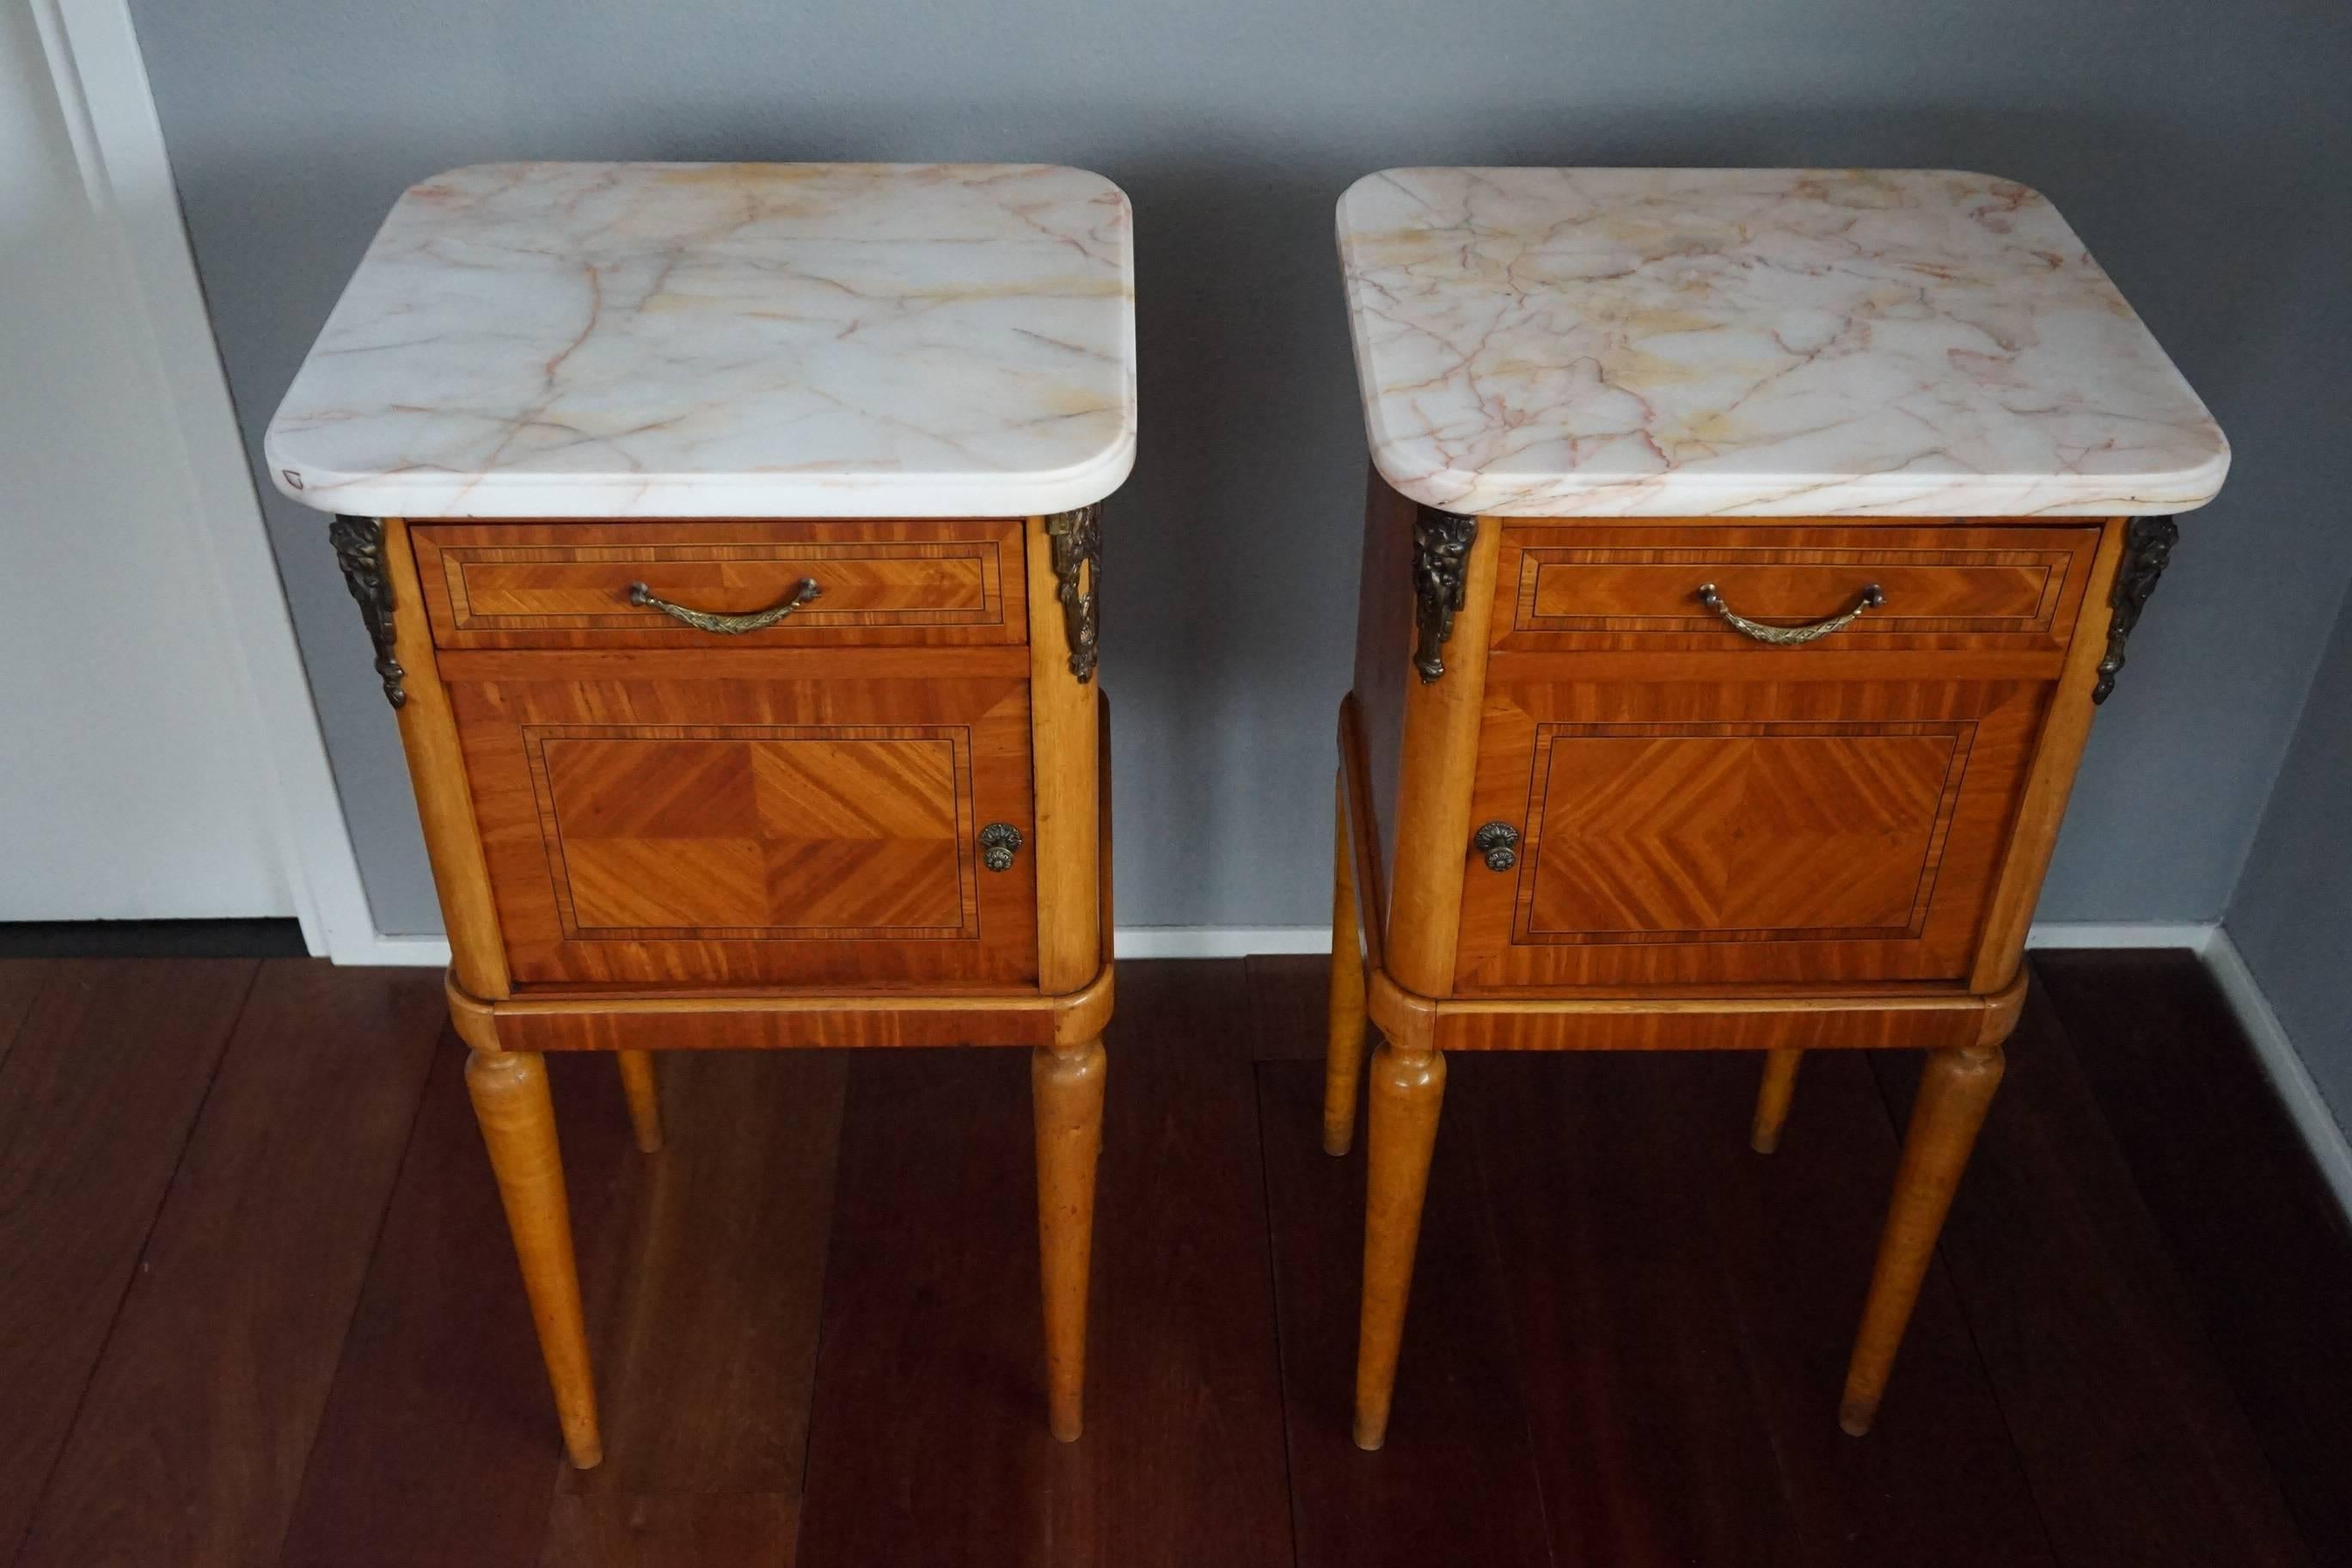 Very stylish and great quality antique nightstands.

This handcrafted, early 20th century pair of bedside cabinets is good condition and their look and feel is simply wonderful. The patina and the patterns in the wood are second to none and the